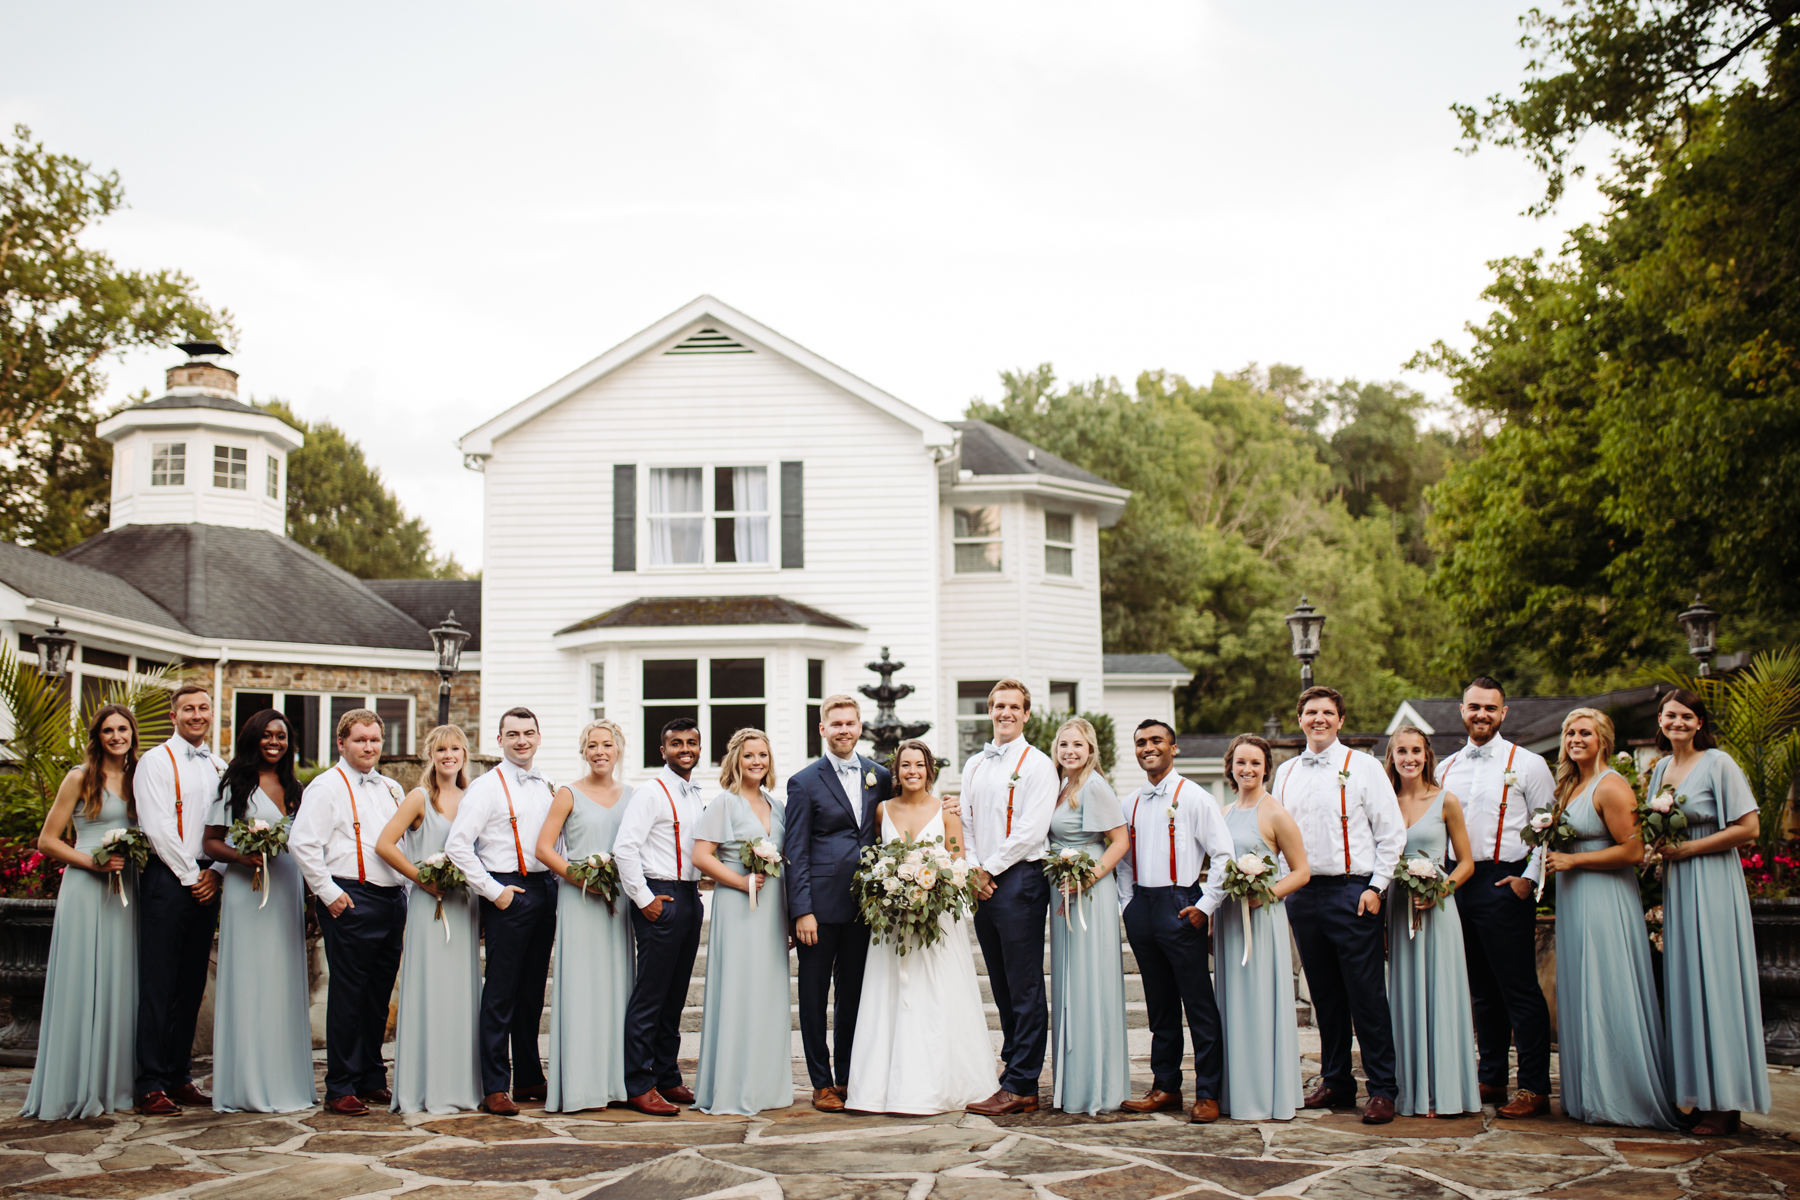 Full bridal party photos at a Sunny summer wedding at Dara's Garden in Knoxville, Tennessee 